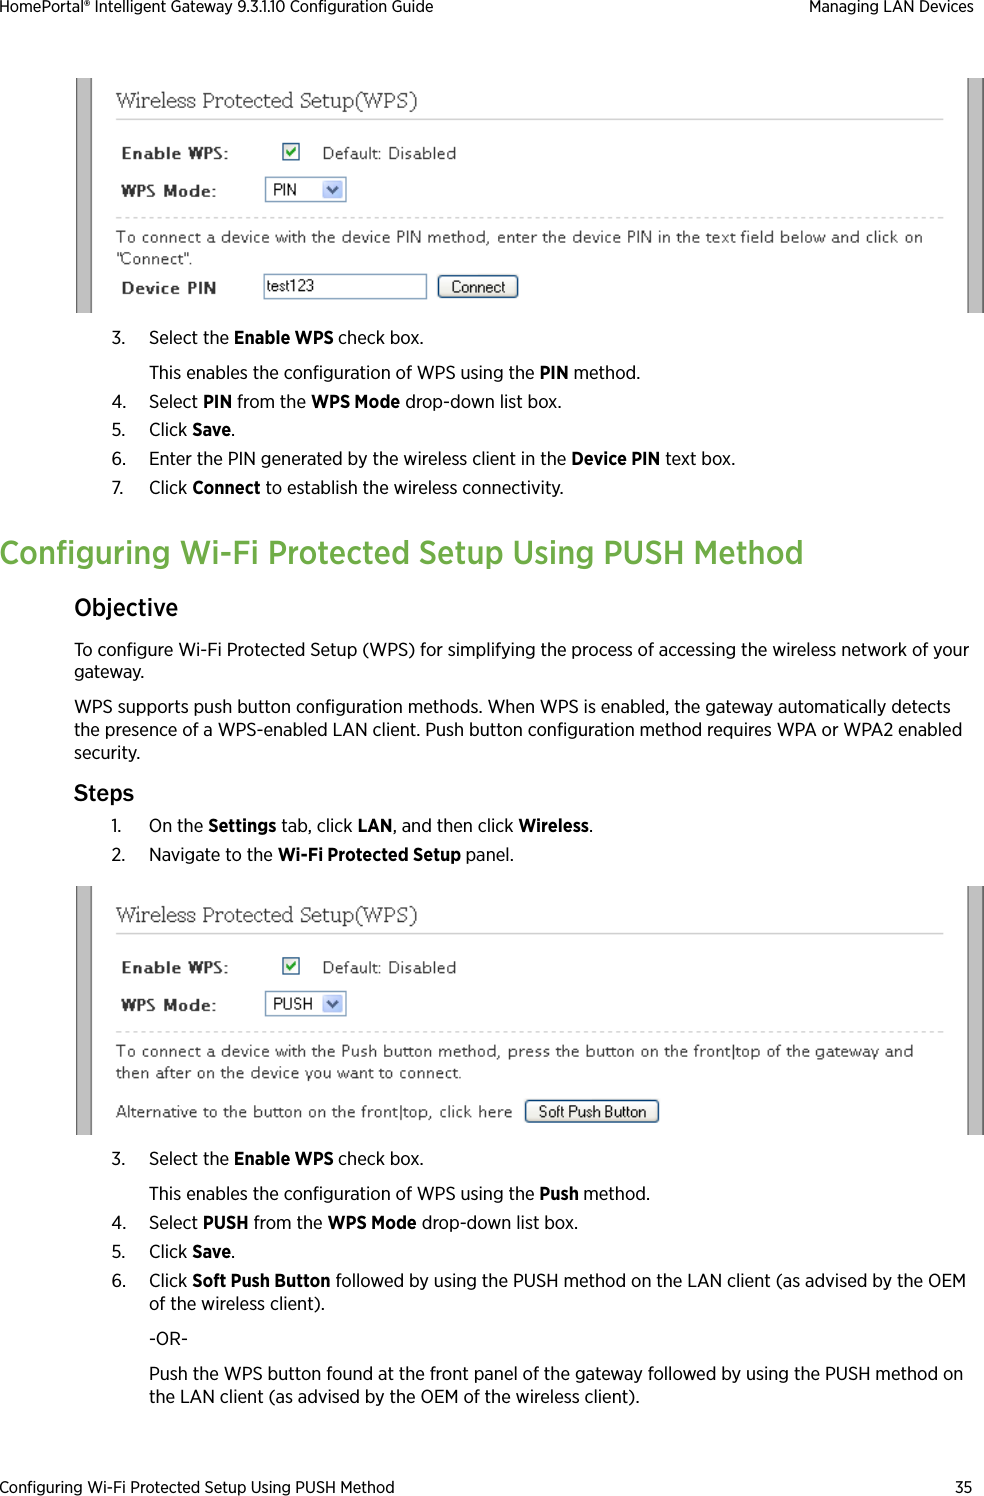 Configuring Wi-Fi Protected Setup Using PUSH Method 35HomePortal® Intelligent Gateway 9.3.1.10 Configuration Guide Managing LAN Devices3. Select the Enable WPS check box.This enables the configuration of WPS using the PIN method.4. Select PIN from the WPS Mode drop-down list box.5. Click Save.6. Enter the PIN generated by the wireless client in the Device PIN text box.7. Click Connect to establish the wireless connectivity.Configuring Wi-Fi Protected Setup Using PUSH MethodObjectiveTo configure Wi-Fi Protected Setup (WPS) for simplifying the process of accessing the wireless network of your gateway.WPS supports push button configuration methods. When WPS is enabled, the gateway automatically detects the presence of a WPS-enabled LAN client. Push button configuration method requires WPA or WPA2 enabled security.Steps1. On the Settings tab, click LAN, and then click Wireless.2. Navigate to the Wi-Fi Protected Setup panel.3. Select the Enable WPS check box.This enables the configuration of WPS using the Push method.4. Select PUSH from the WPS Mode drop-down list box.5. Click Save.6. Click Soft Push Button followed by using the PUSH method on the LAN client (as advised by the OEM of the wireless client). -OR-Push the WPS button found at the front panel of the gateway followed by using the PUSH method on the LAN client (as advised by the OEM of the wireless client). 